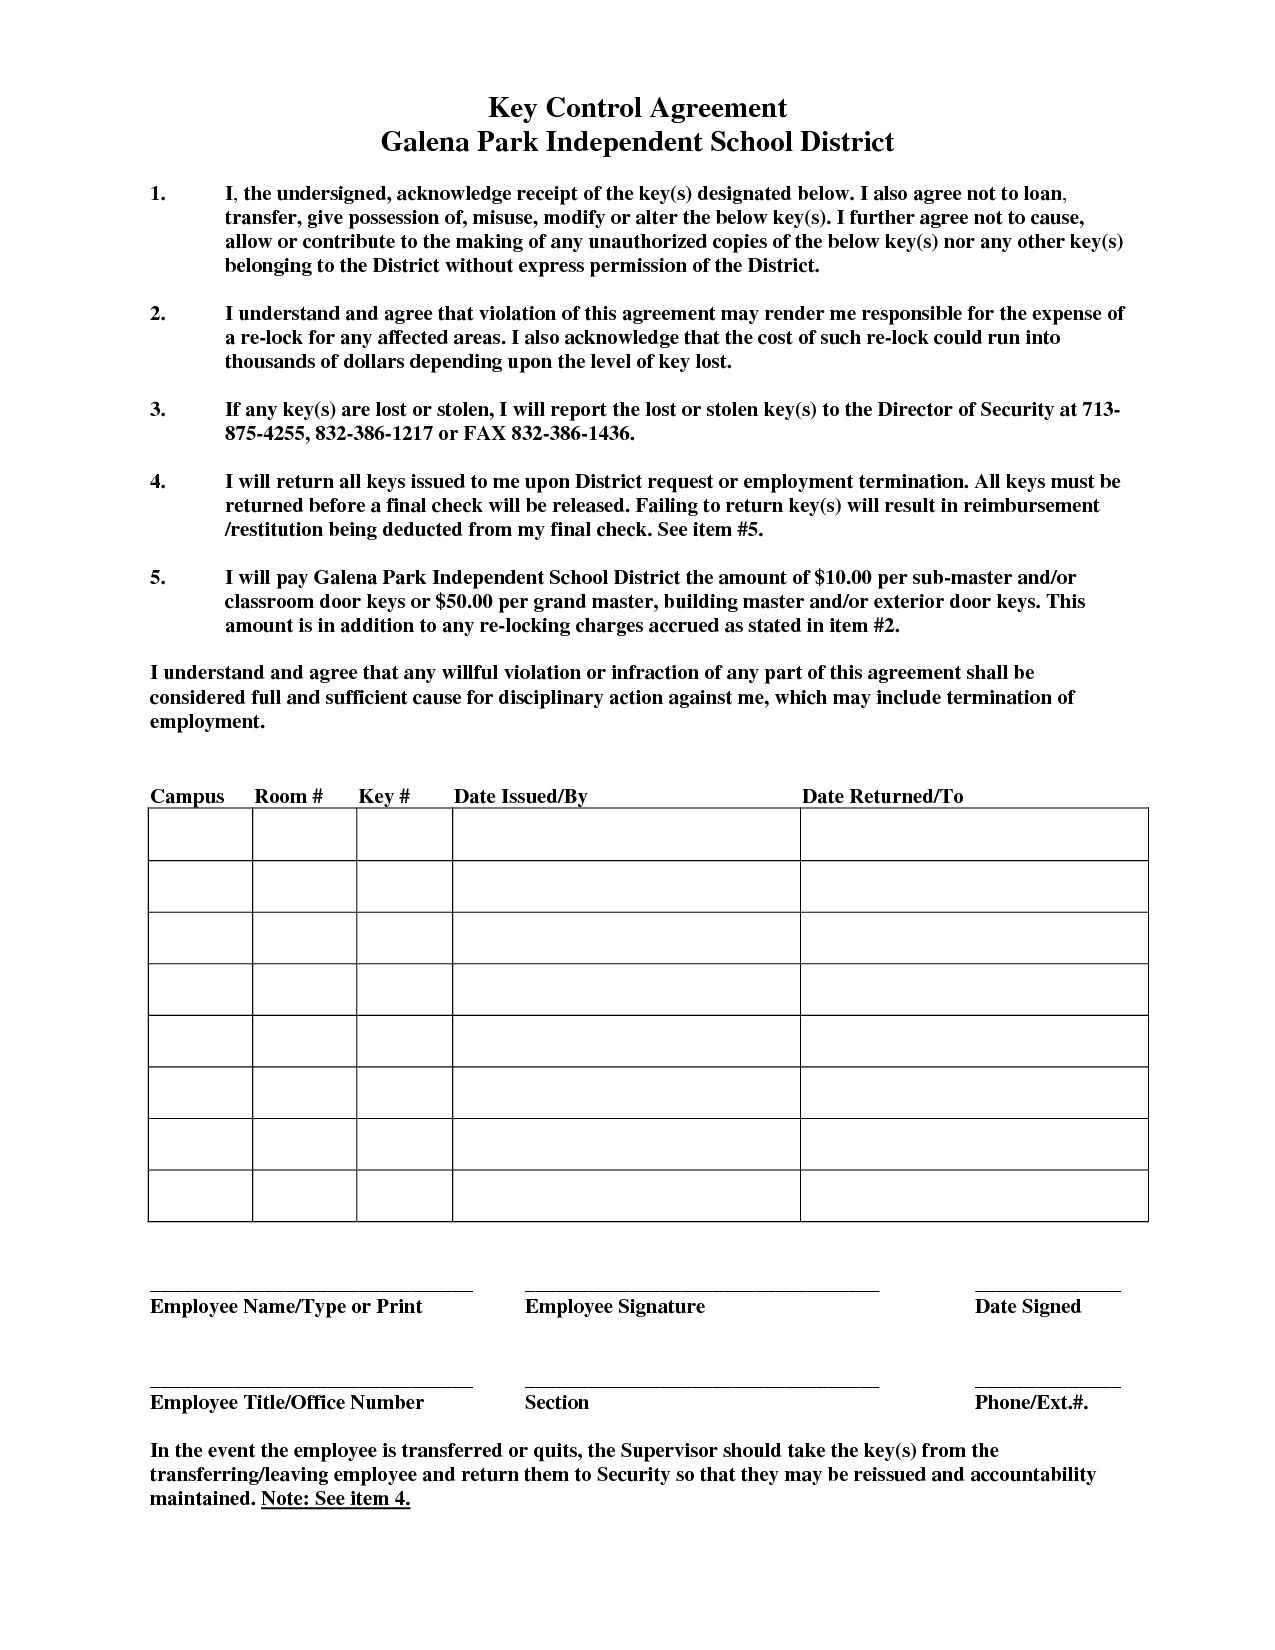 employee key holder agreement form complete best s of key agreement template employee key zu c119129